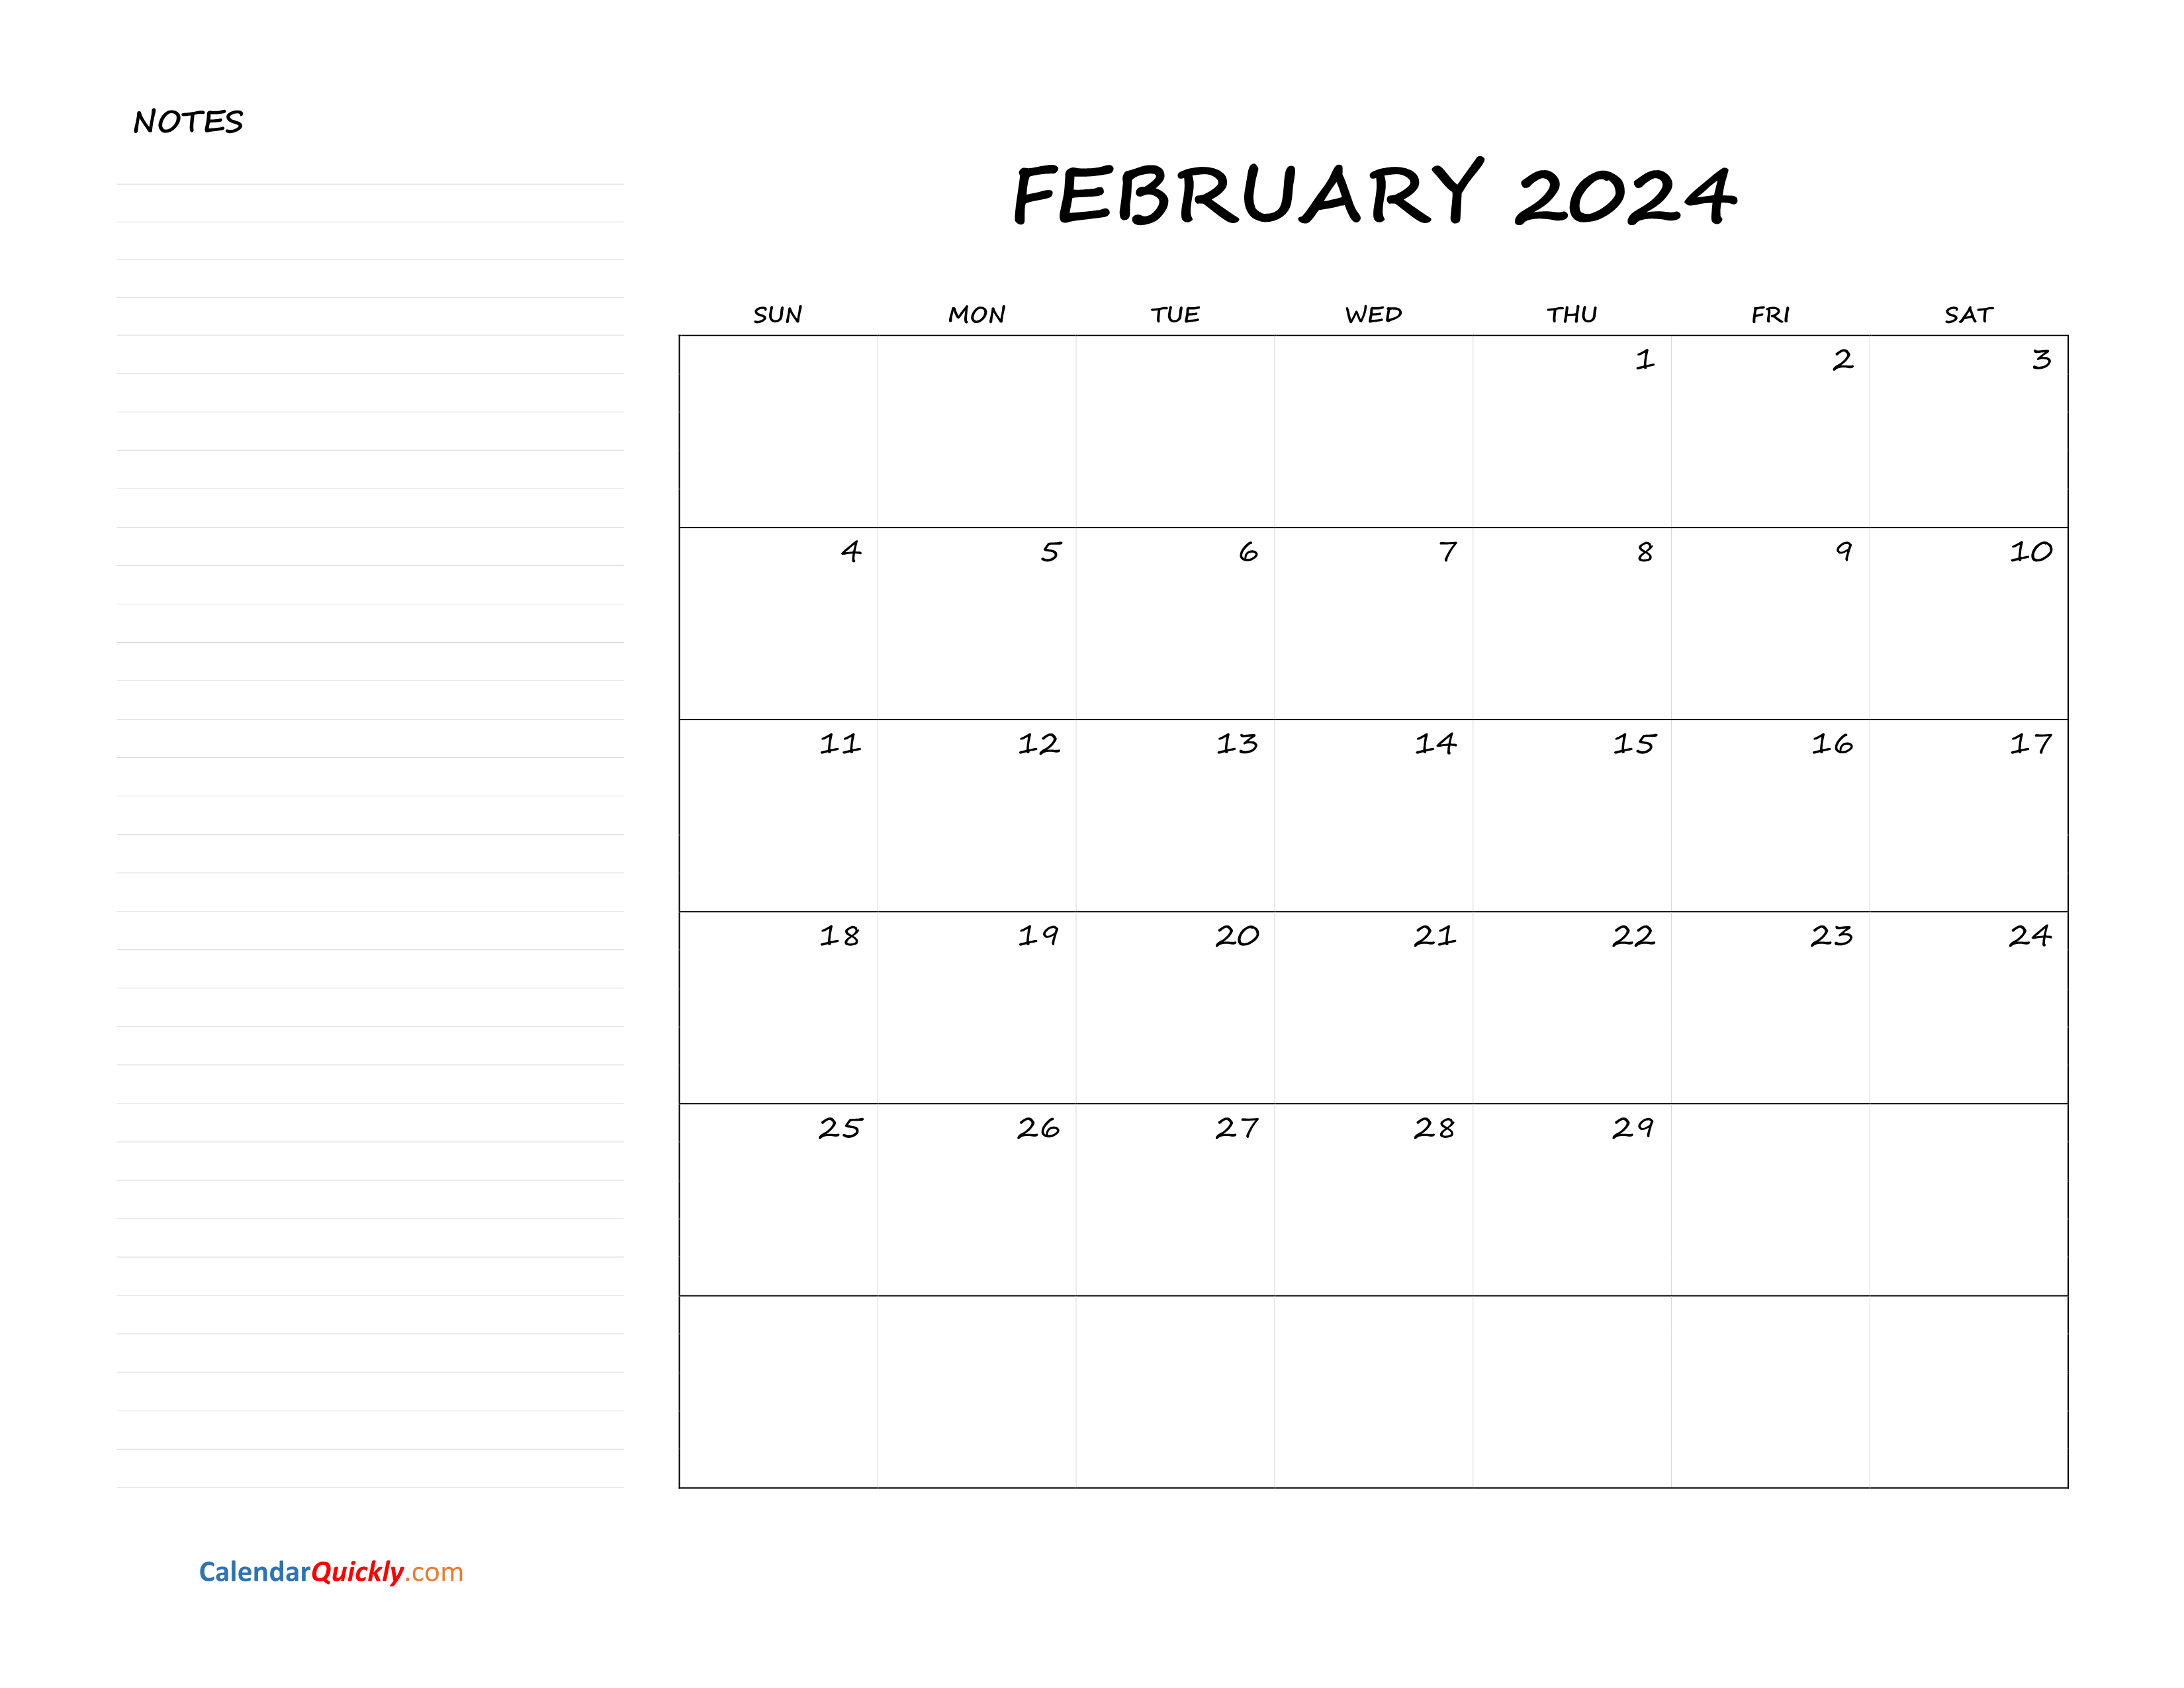 february-blank-calendar-2024-with-notes-calendar-quickly